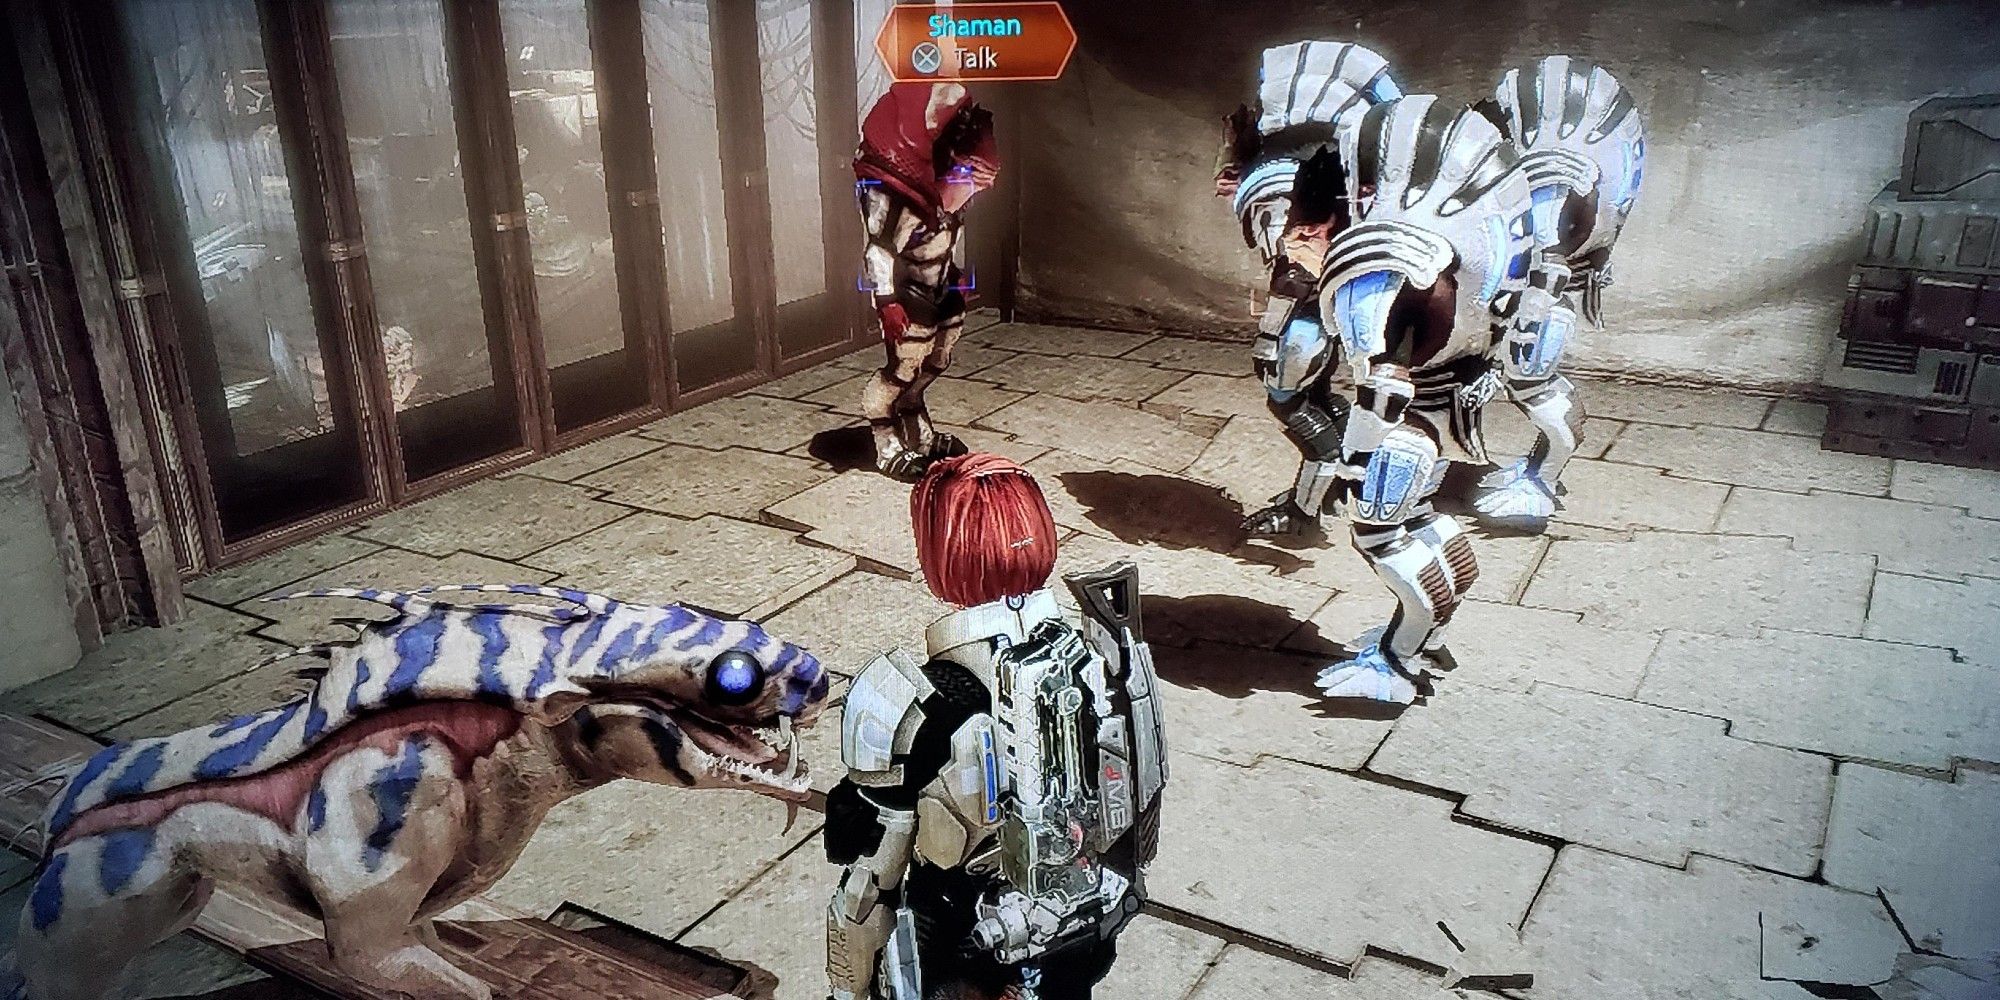 Urz follows Shepard and her squad to see the Urdnot Shaman in Mass Effect 2